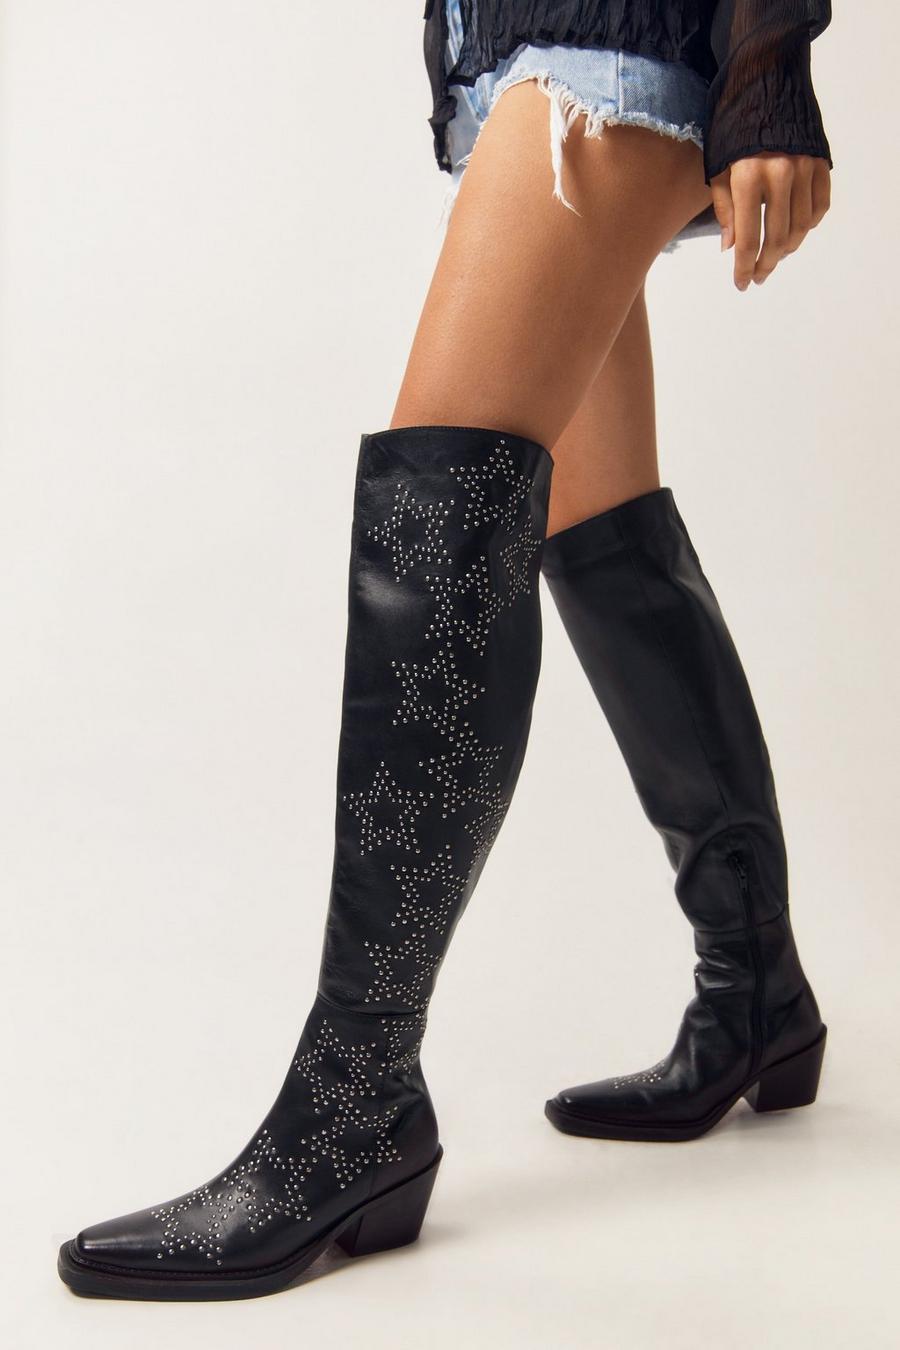 Cowboy Boots | Women's Cowboy & Country Boots | Nasty Gal